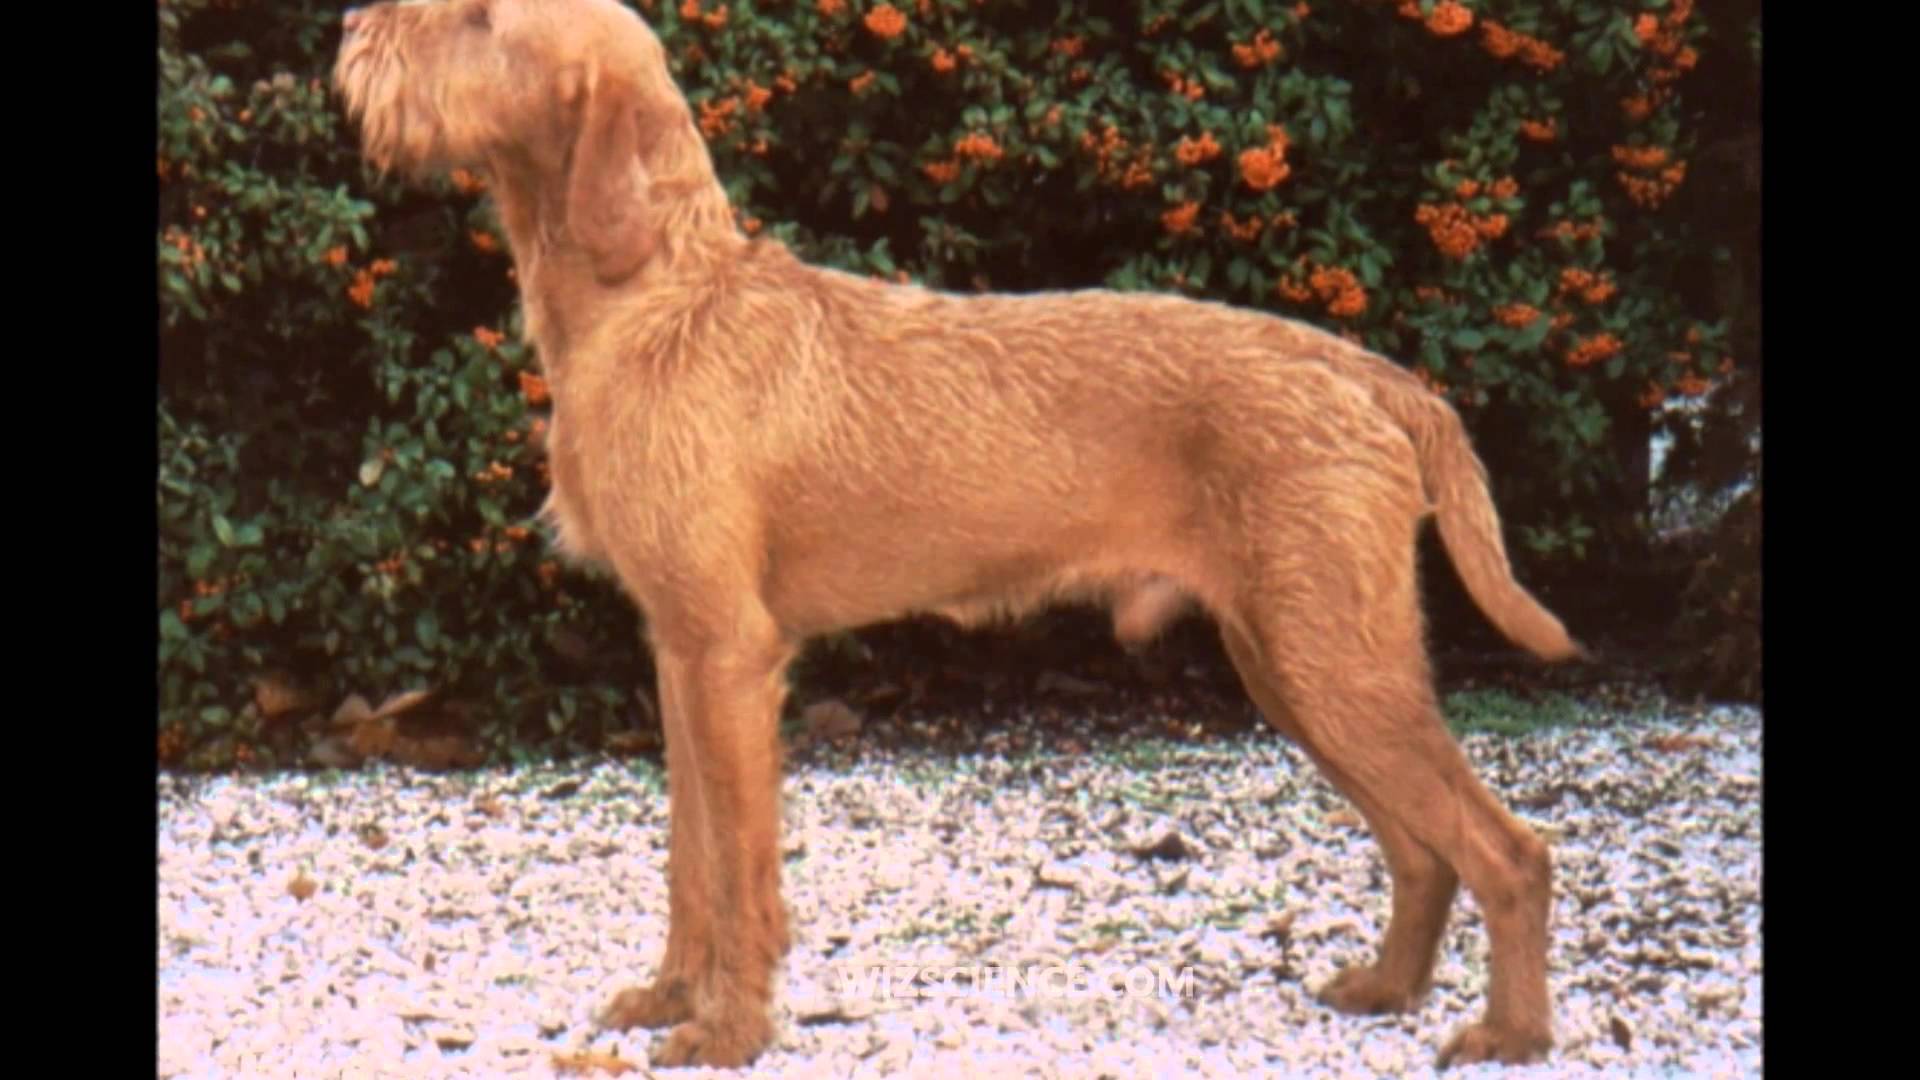 Wirehaired Vizsla - Video Learning - WizScience.com - YouTube